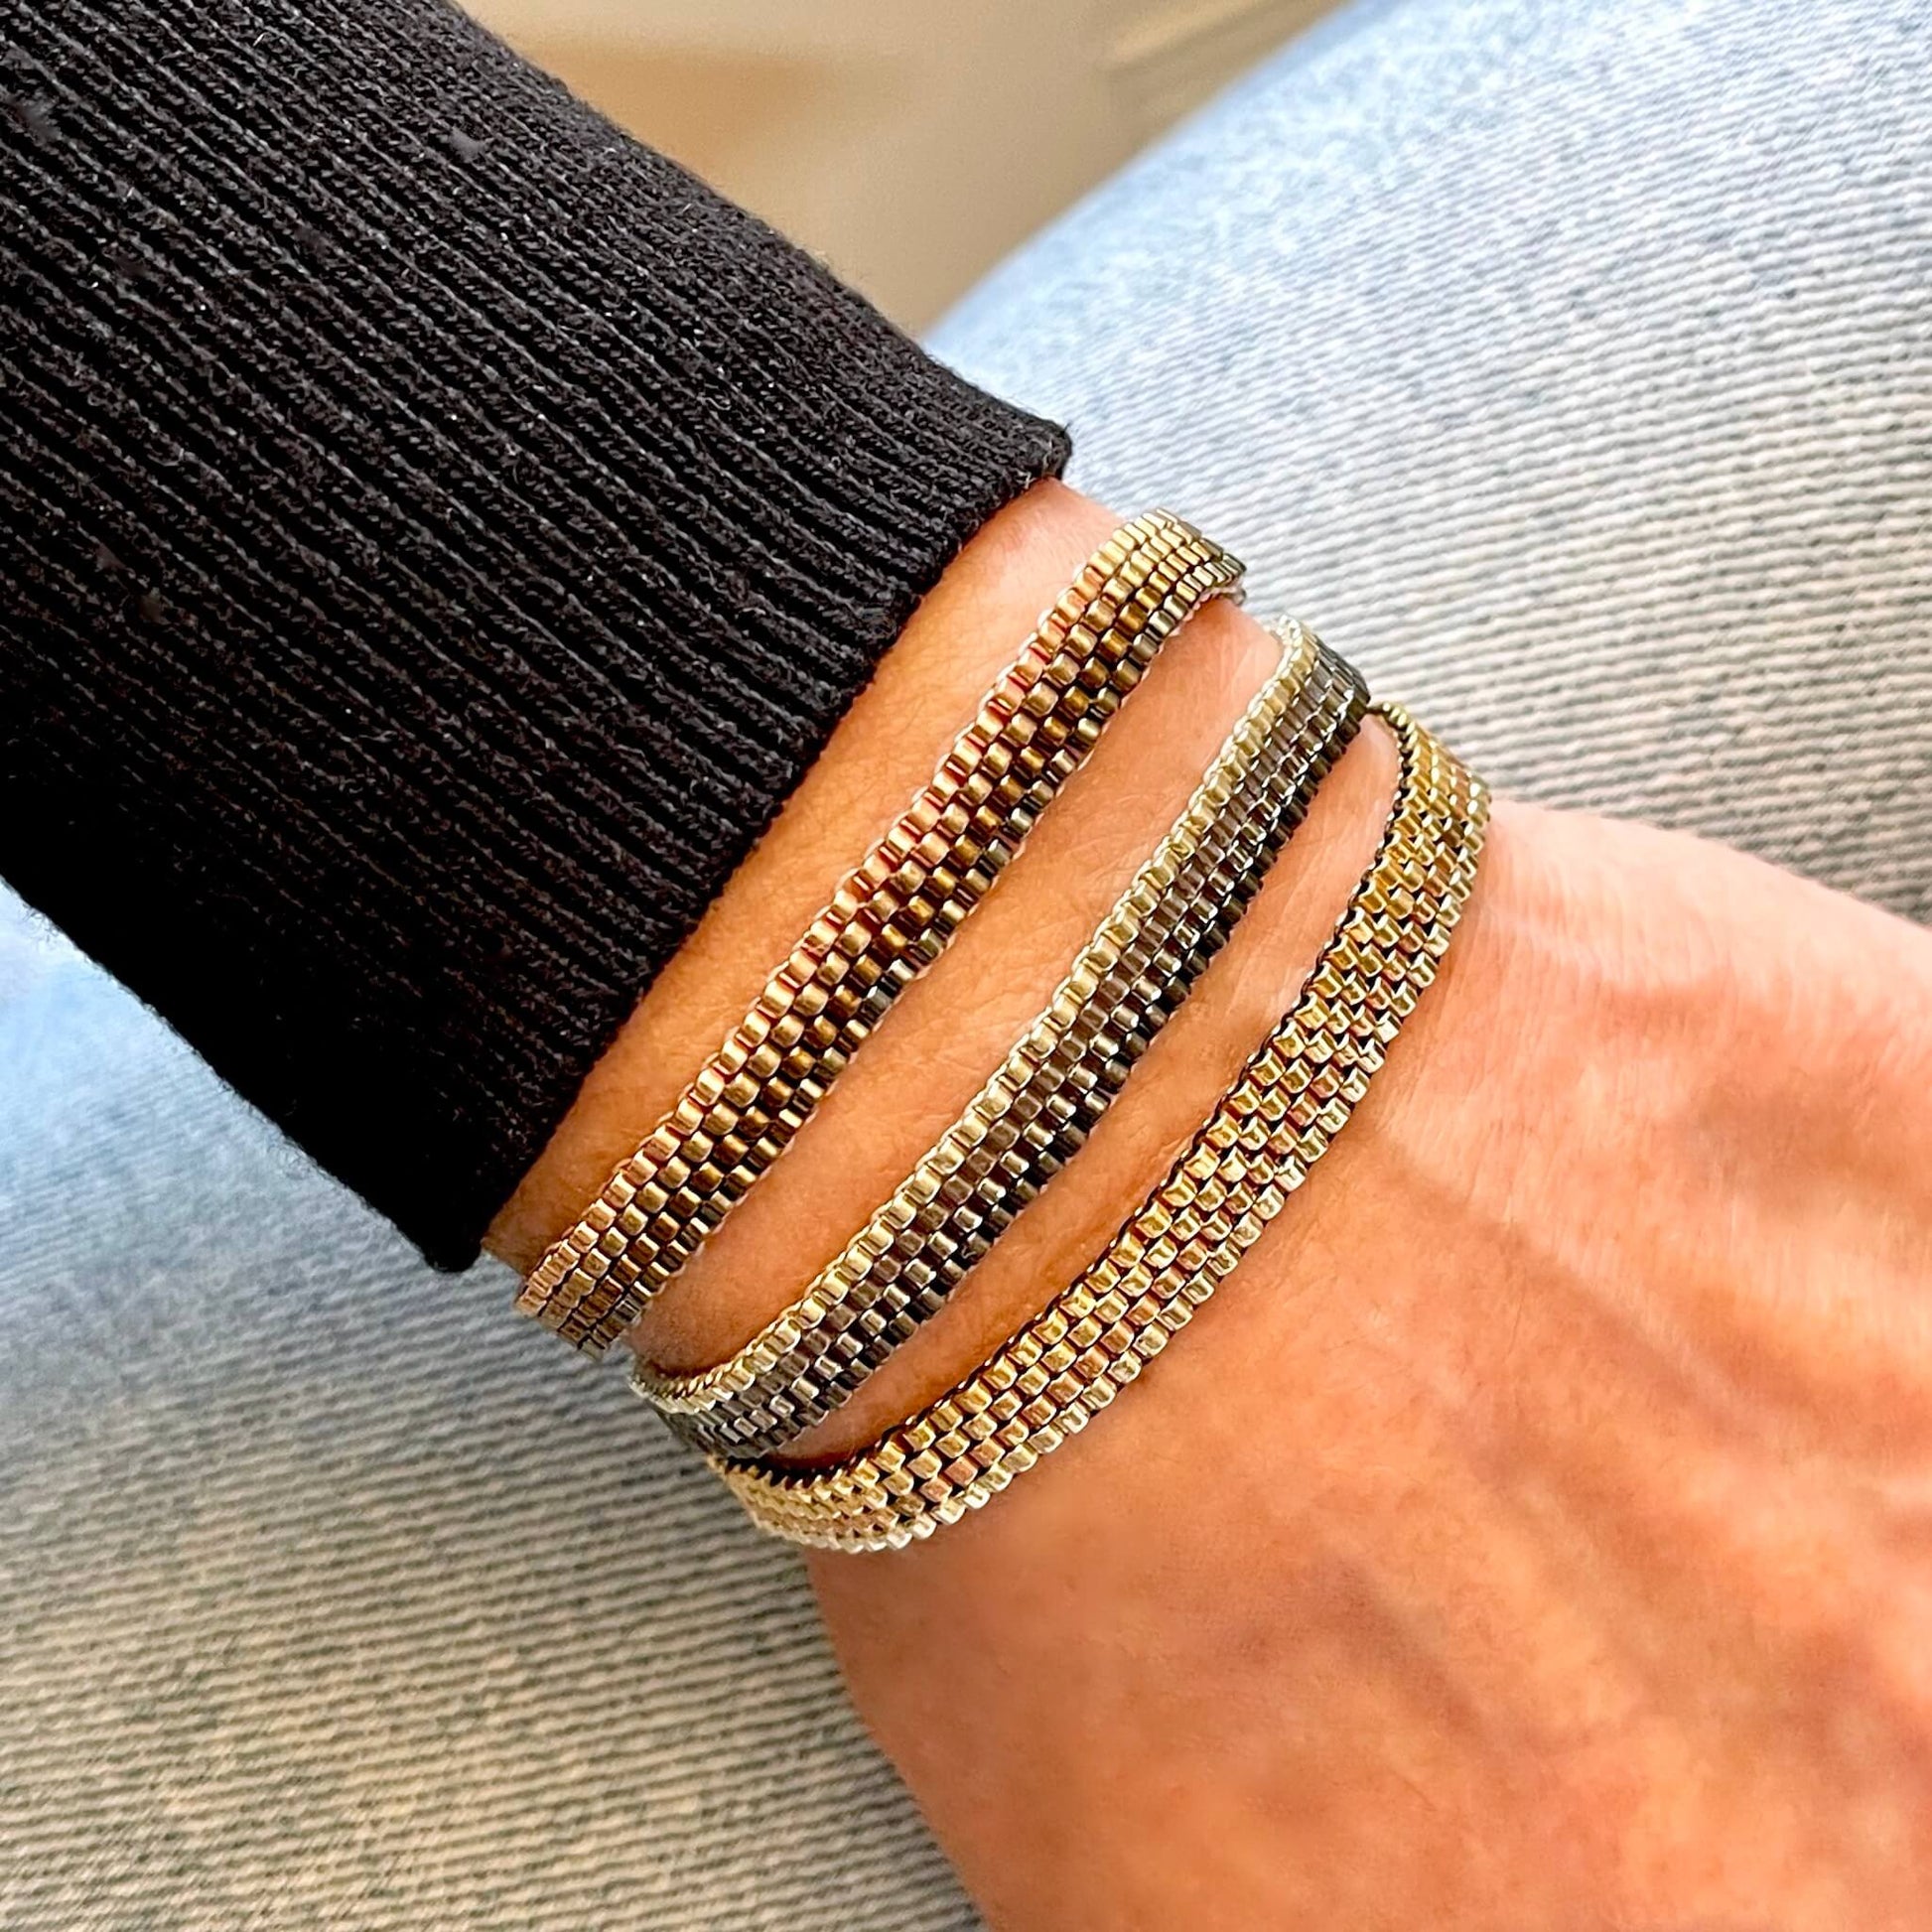 Three thin woven metalllic seed bead boho bracelets in various color combinations such as gunmetals, bronzes, or gold tones.